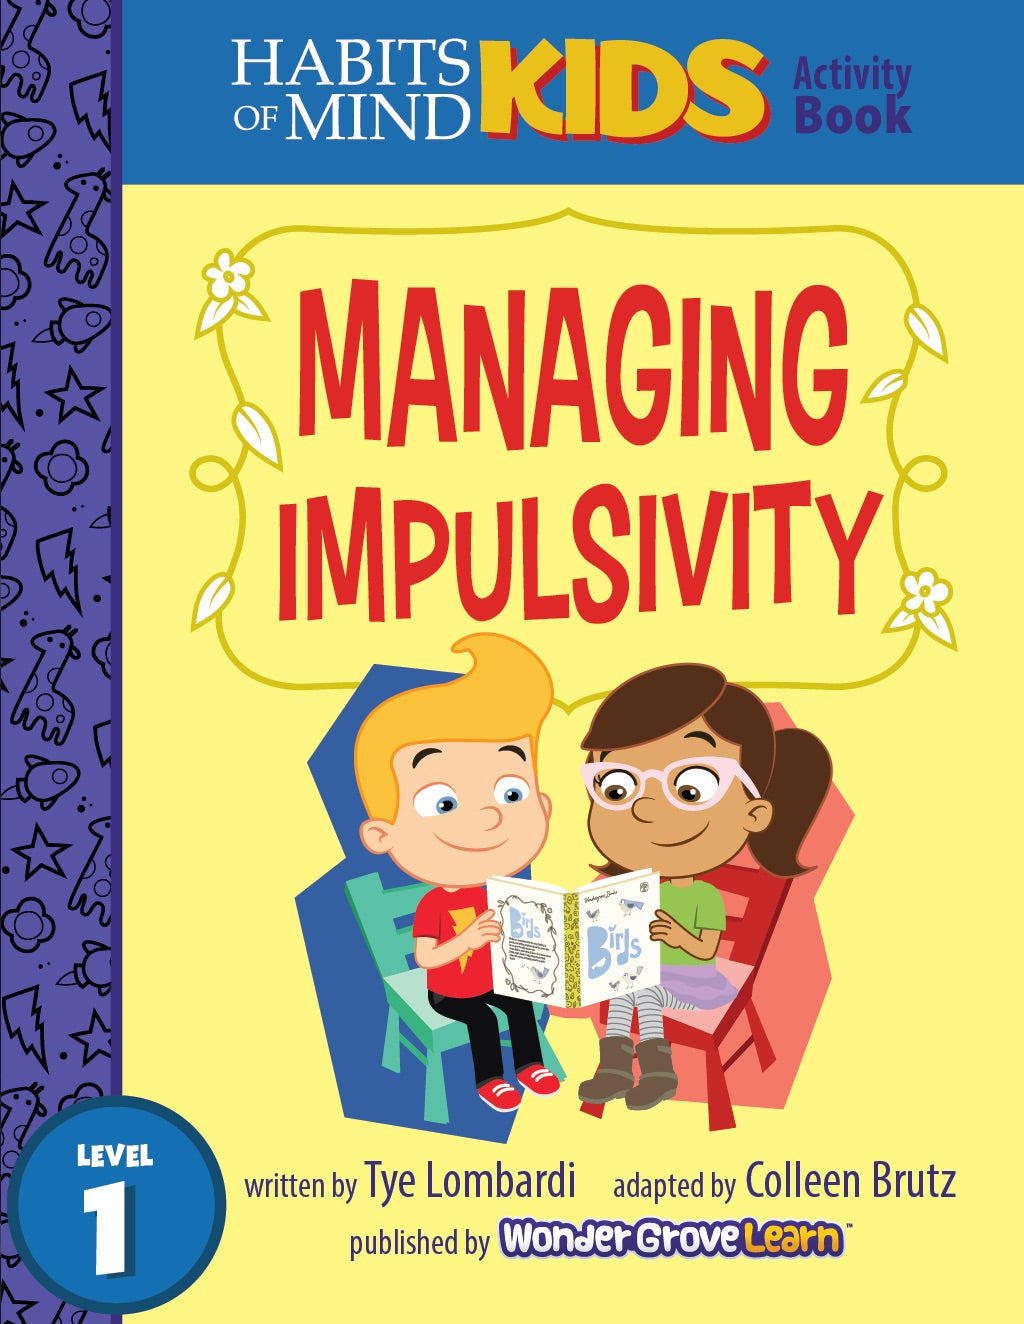 Managing Impulsivity: A Habits of Mind Story for First Grade